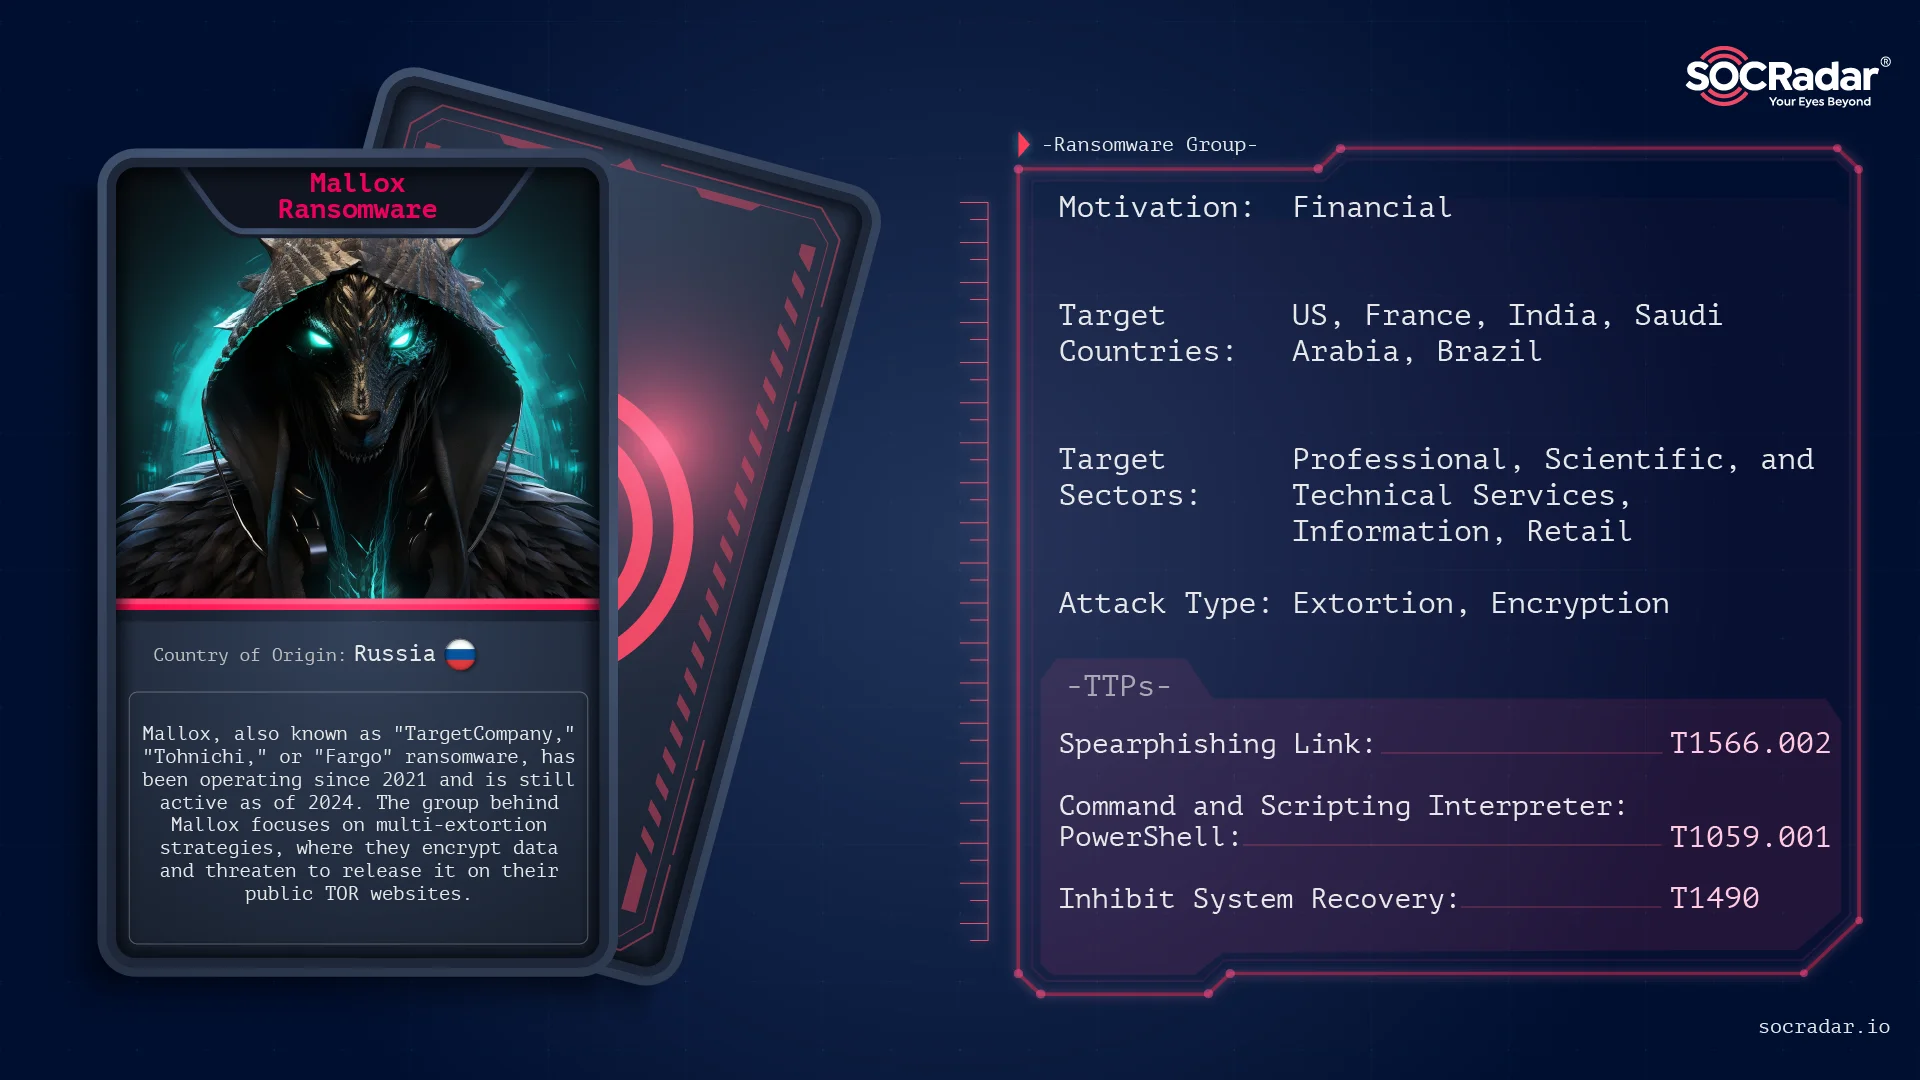 Threat actor card of Mallox Ransomware